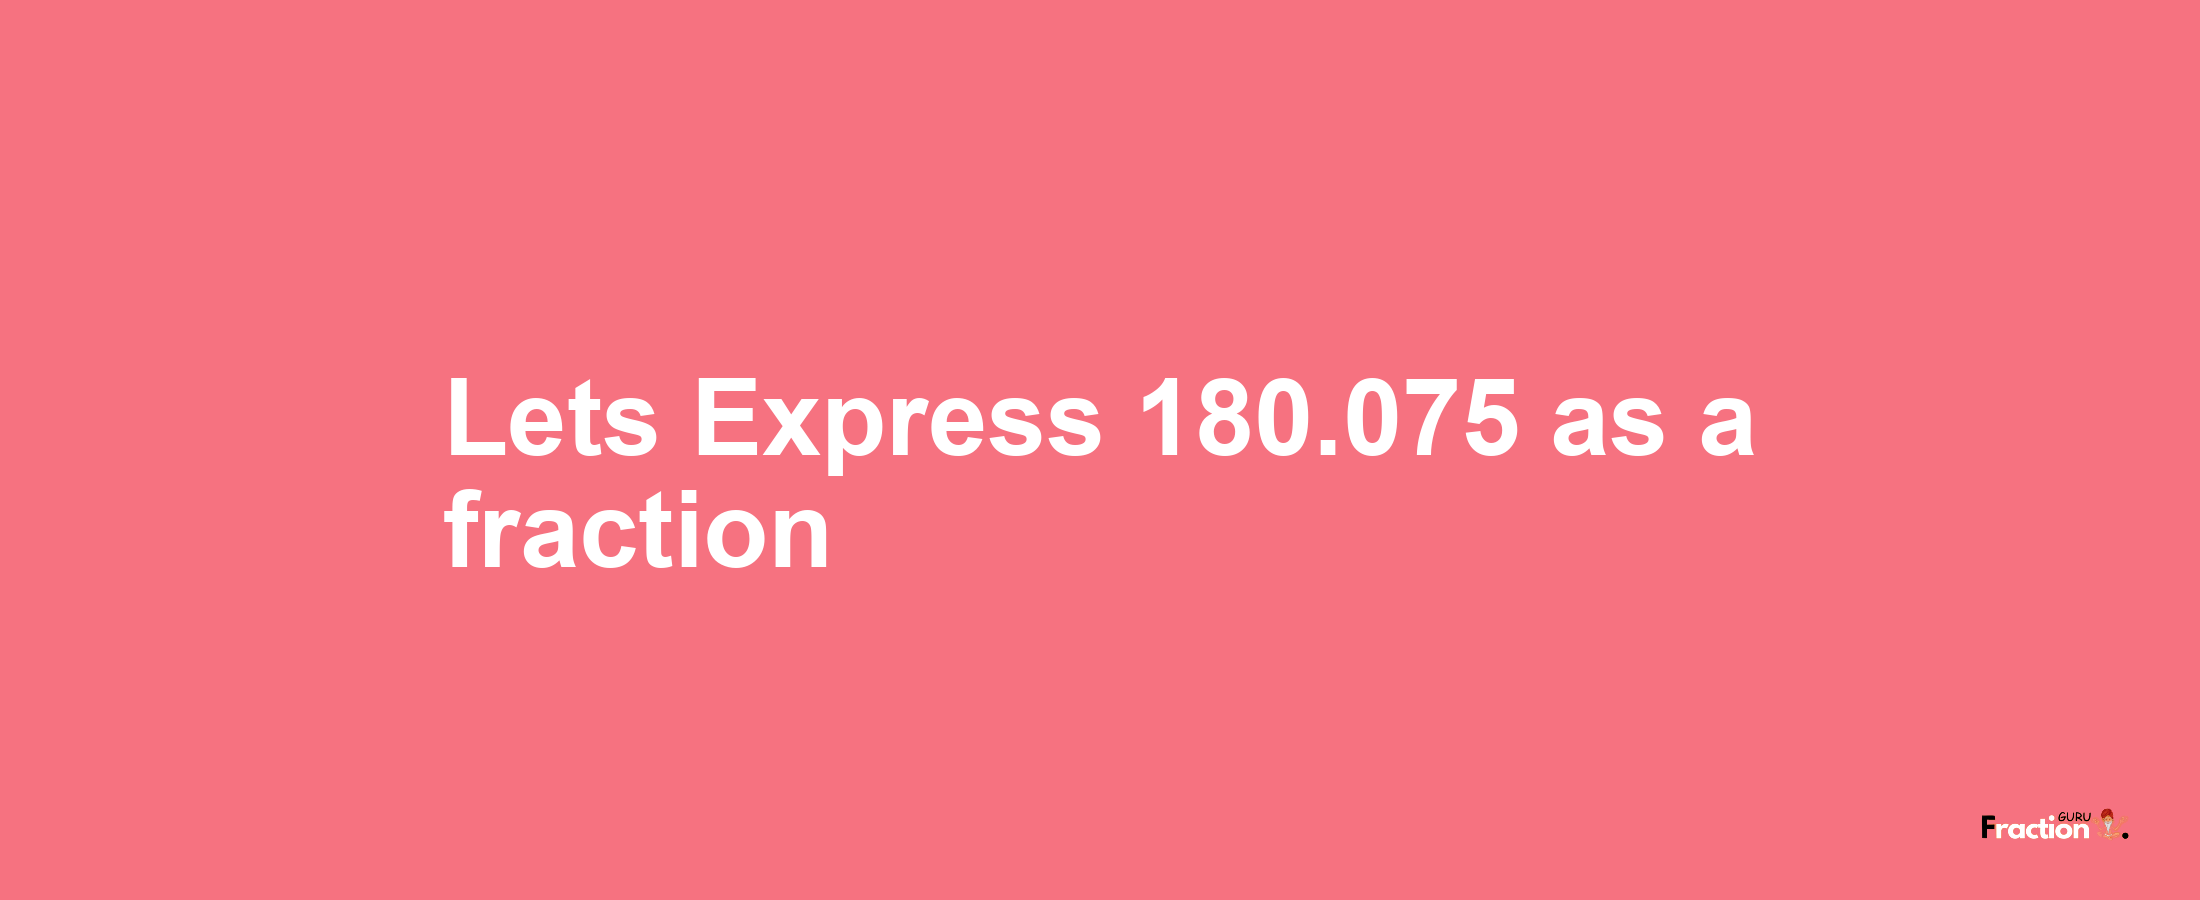 Lets Express 180.075 as afraction